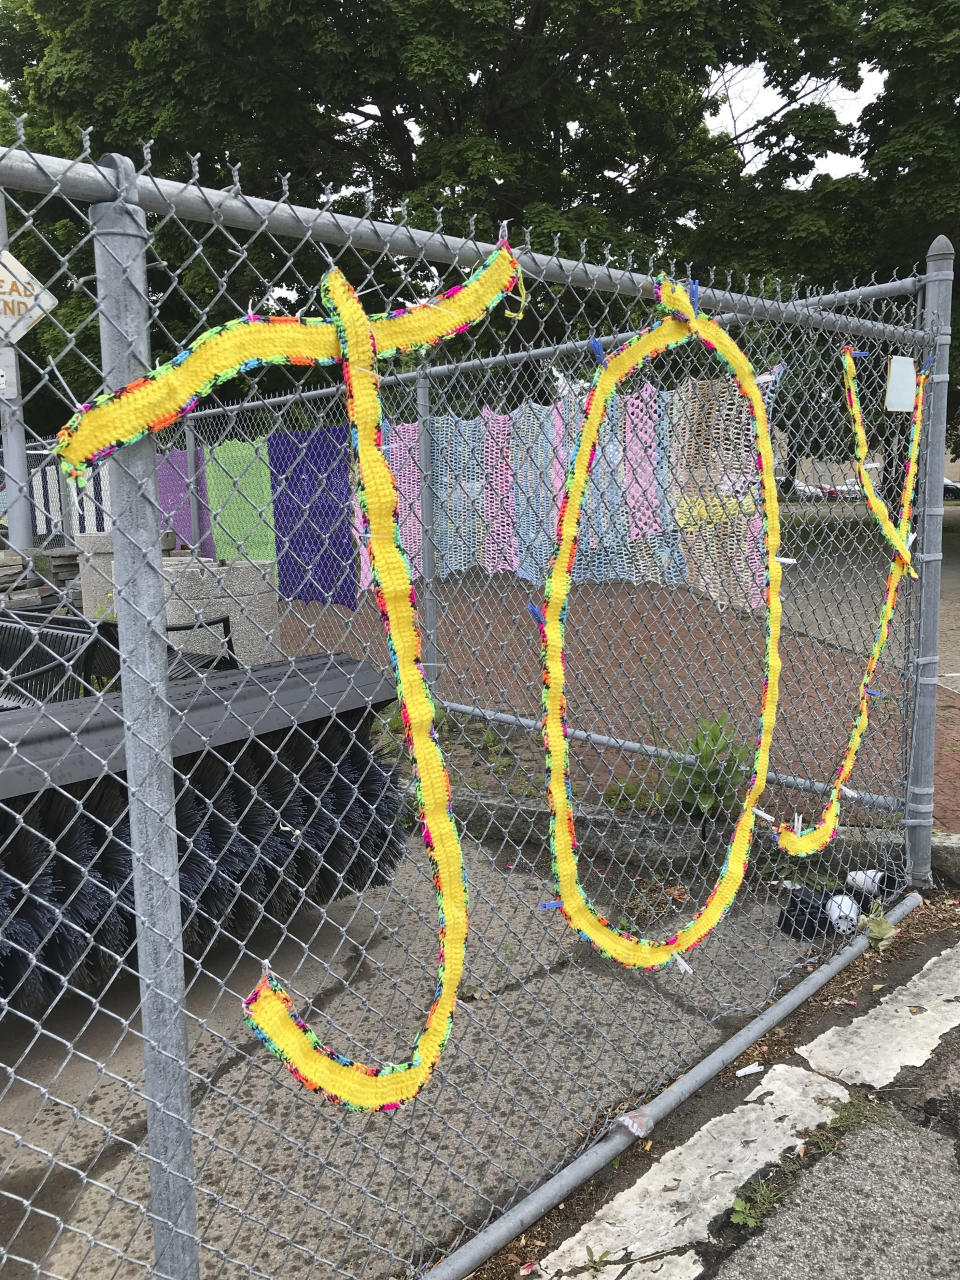 This June 2018 photo provided by Hinda Mandell shows a yarn installation at Schiller Park in Rochester, N.Y. More than 40 women from Rochester participated in "Yarn at Schiller Park," a community event organized by Mandell to spruce up Schiller Park. Dozens of knit and crocheted blankets decorated chain-link fencing to bring color to a neglected park that bordered an outdoor storage space for the city's construction equipment. Knitters and crocheters call it yarn bombing. They're using fiber arts to make political statements, or maybe just to lift people's spirits. Experts say yarn bombing is part of a long tradition in which women use textile arts to agitate, excite or inspire. (Hinda Mandell via AP)